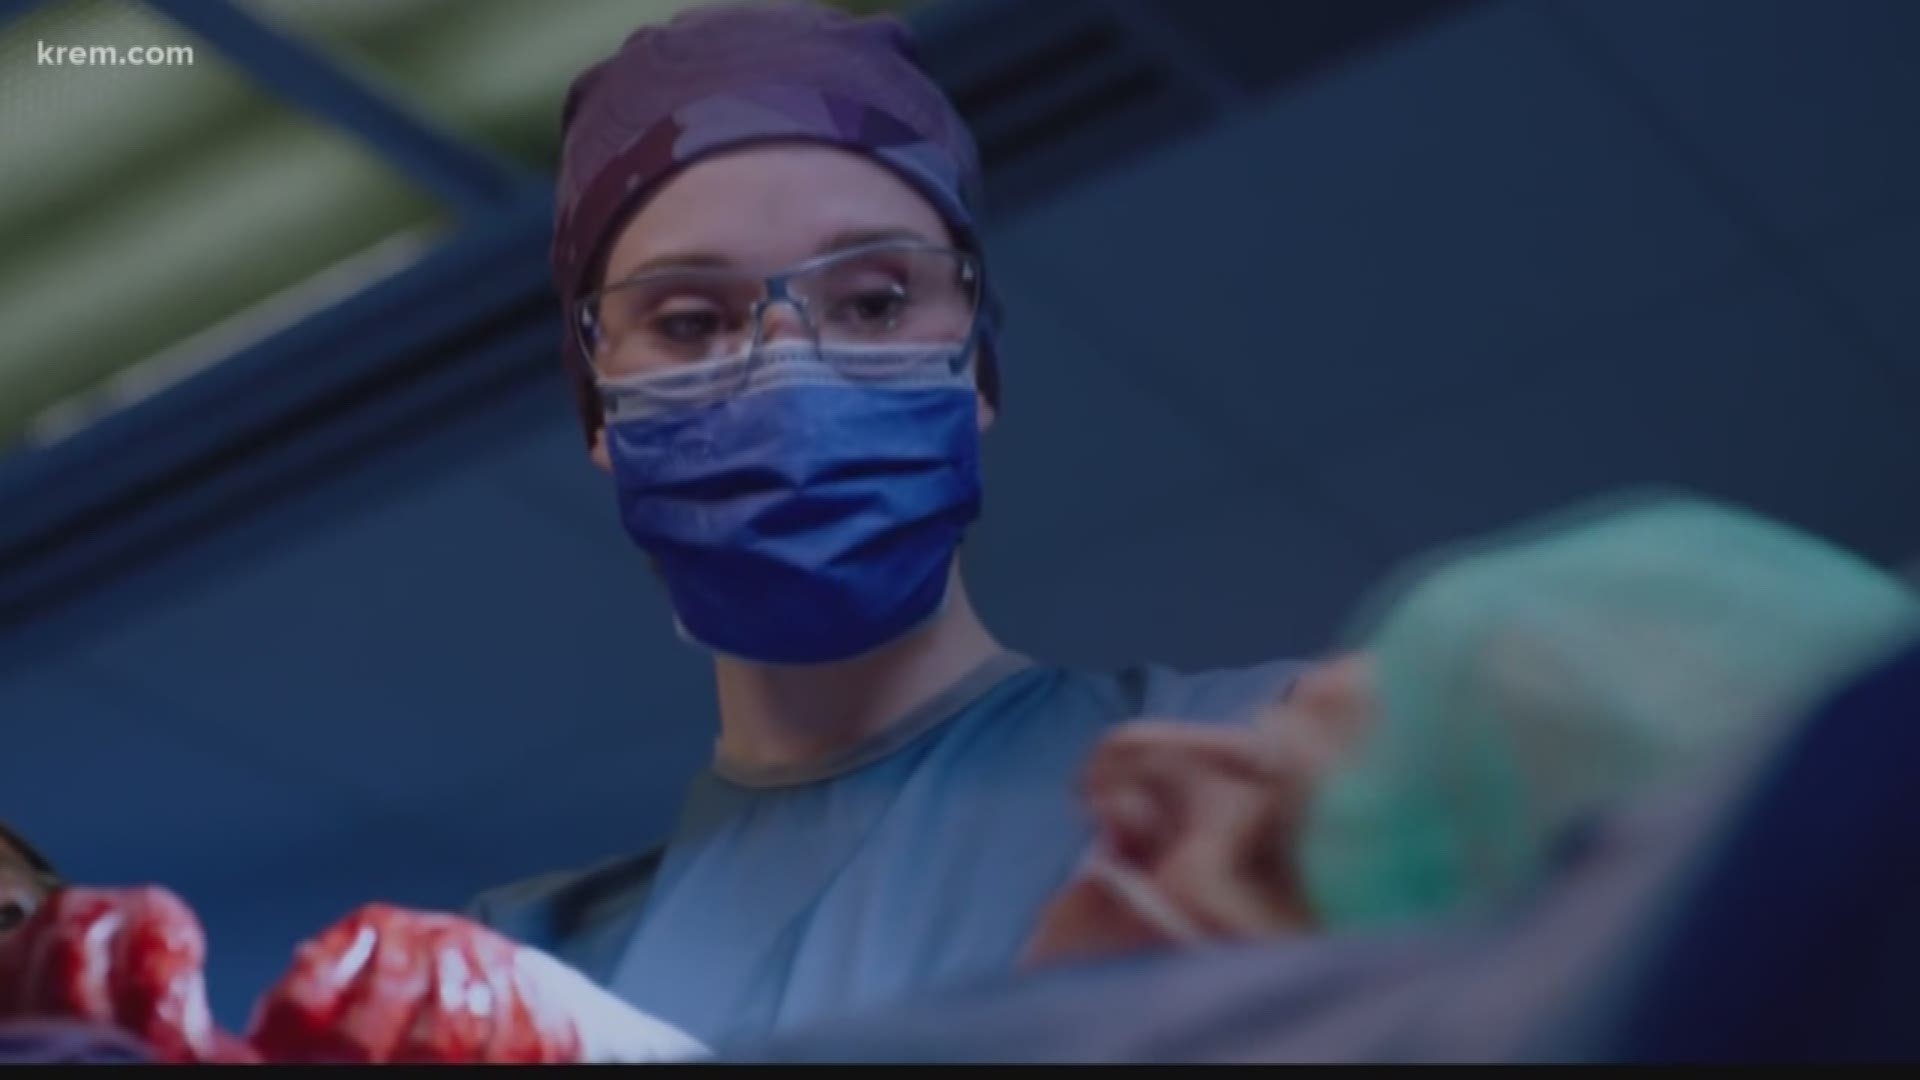 KREM's Health Reporter Rose Beltz is also a cardiac perfusionist and has seen her share of surgeries in the operating room.